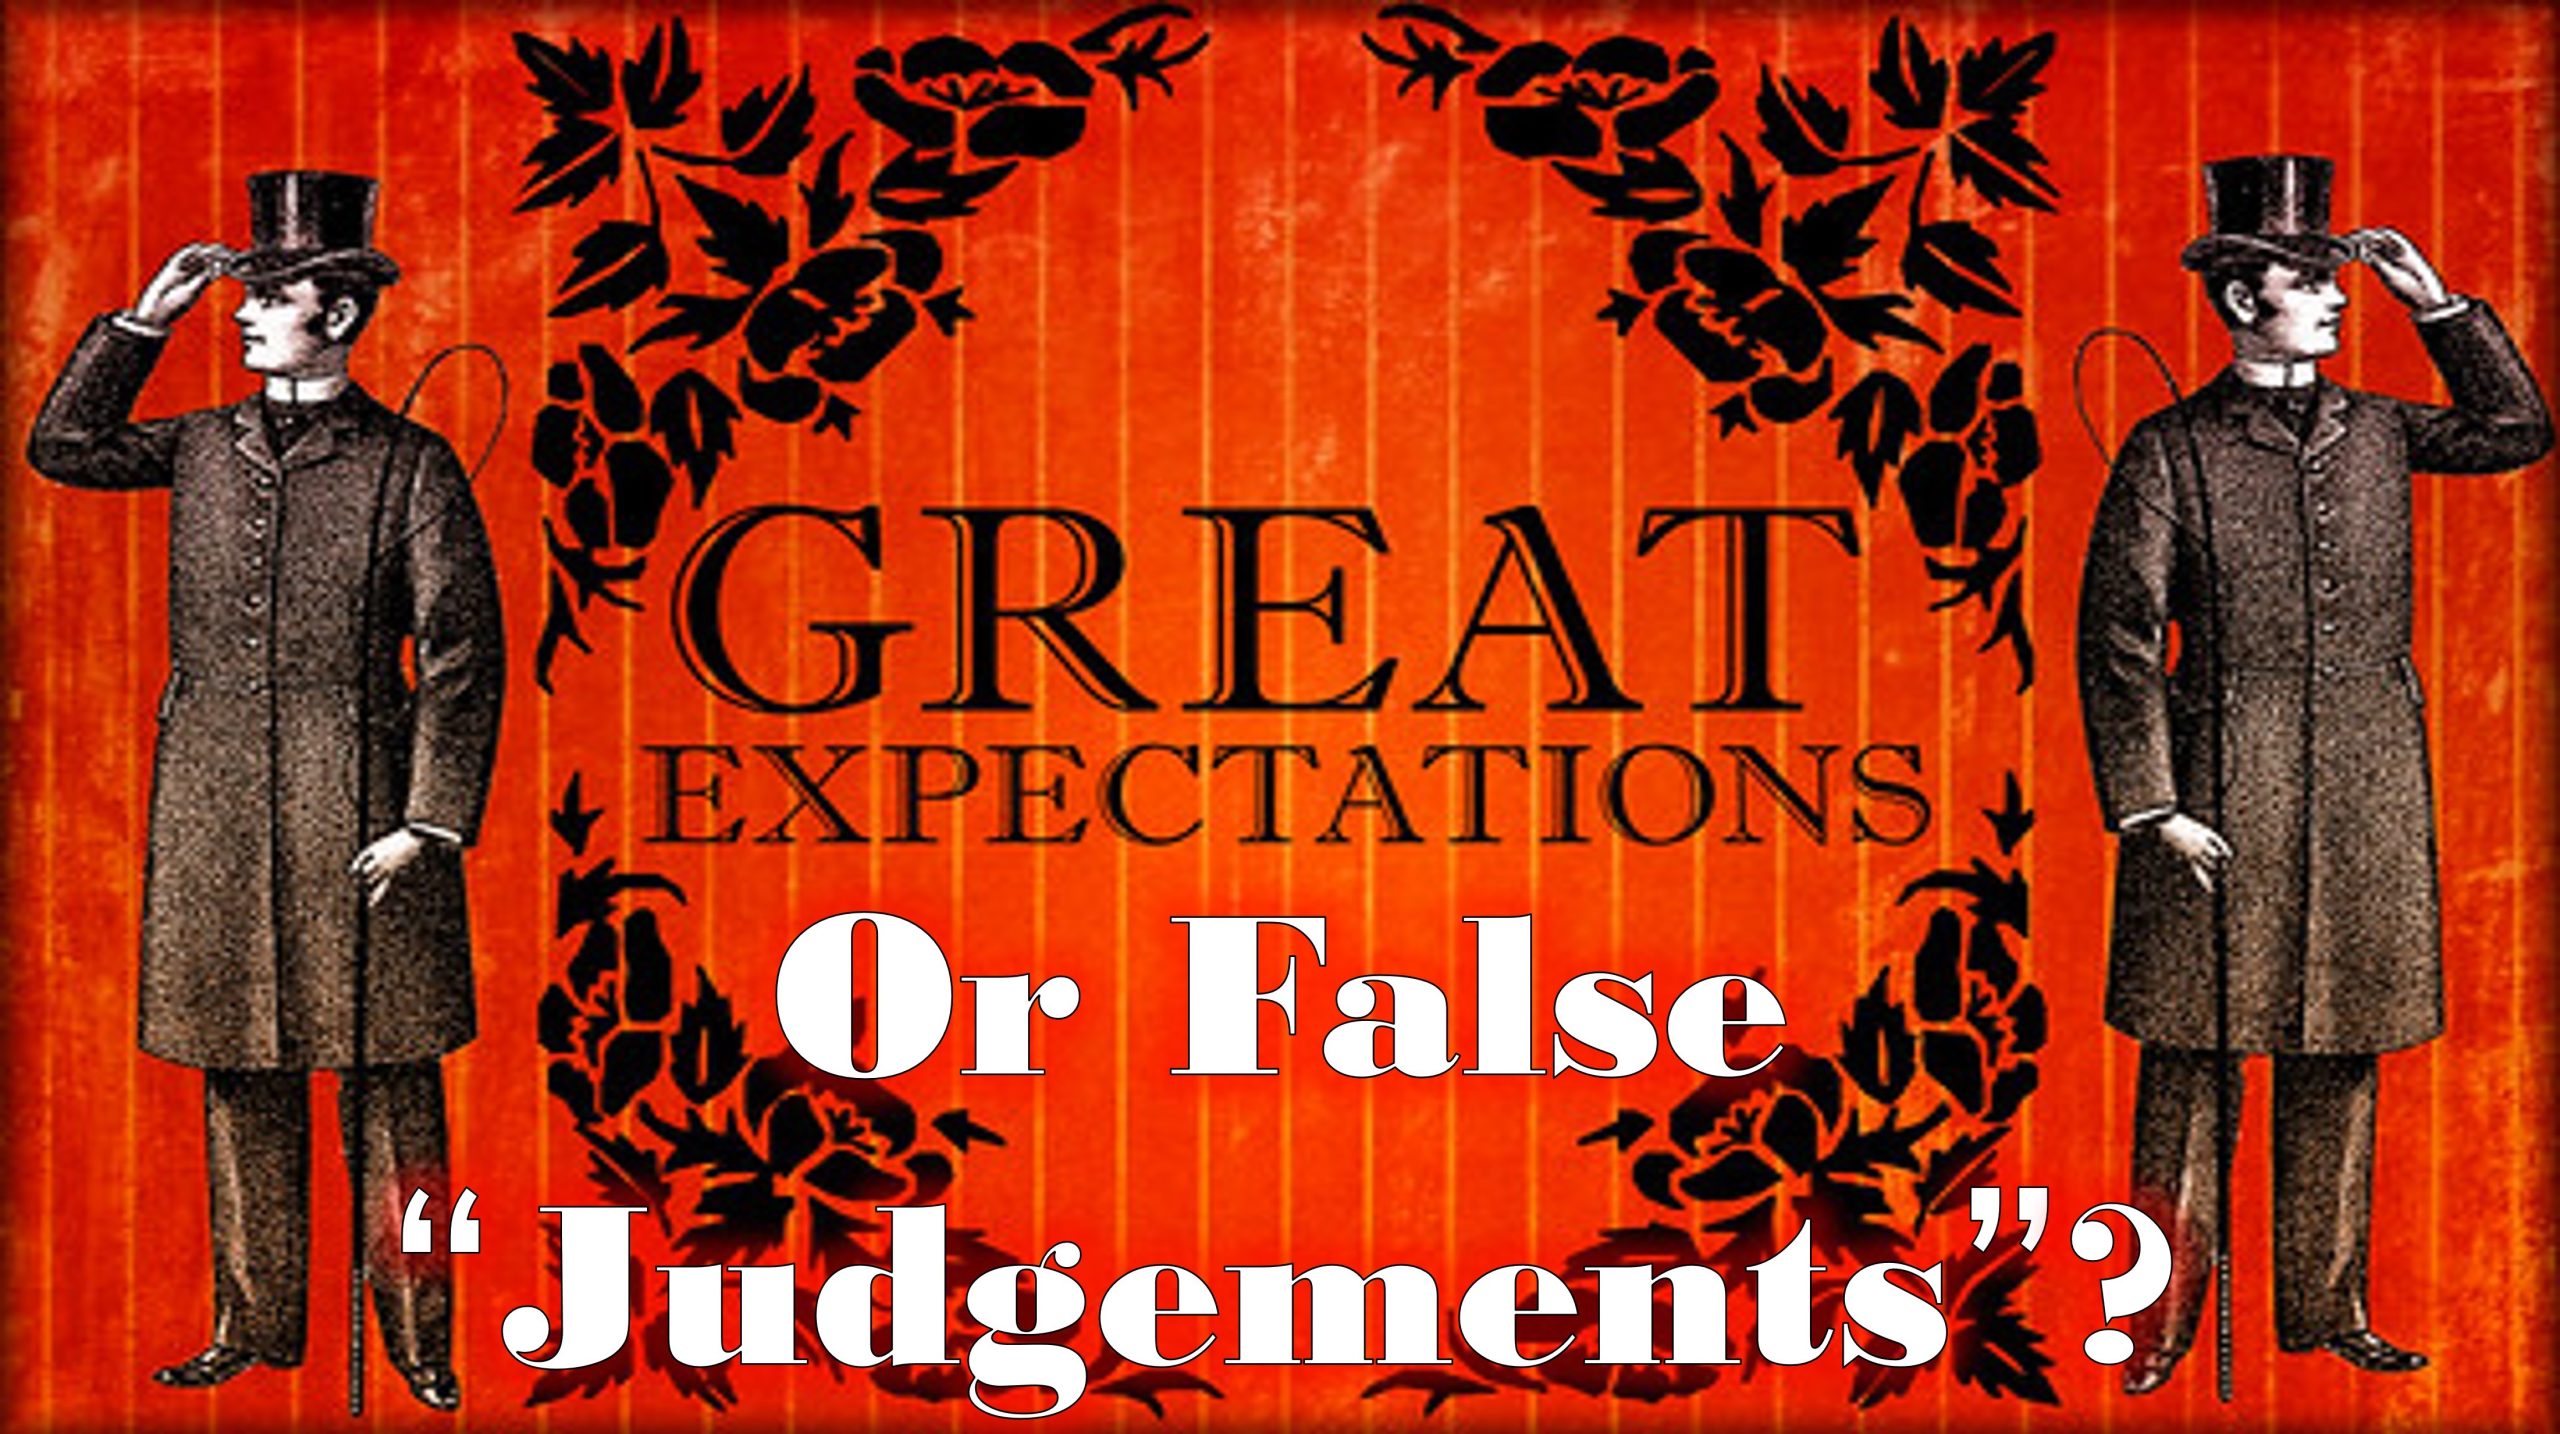 You are currently viewing Great “Expectations”-Or False “Judgements”? – January 28th